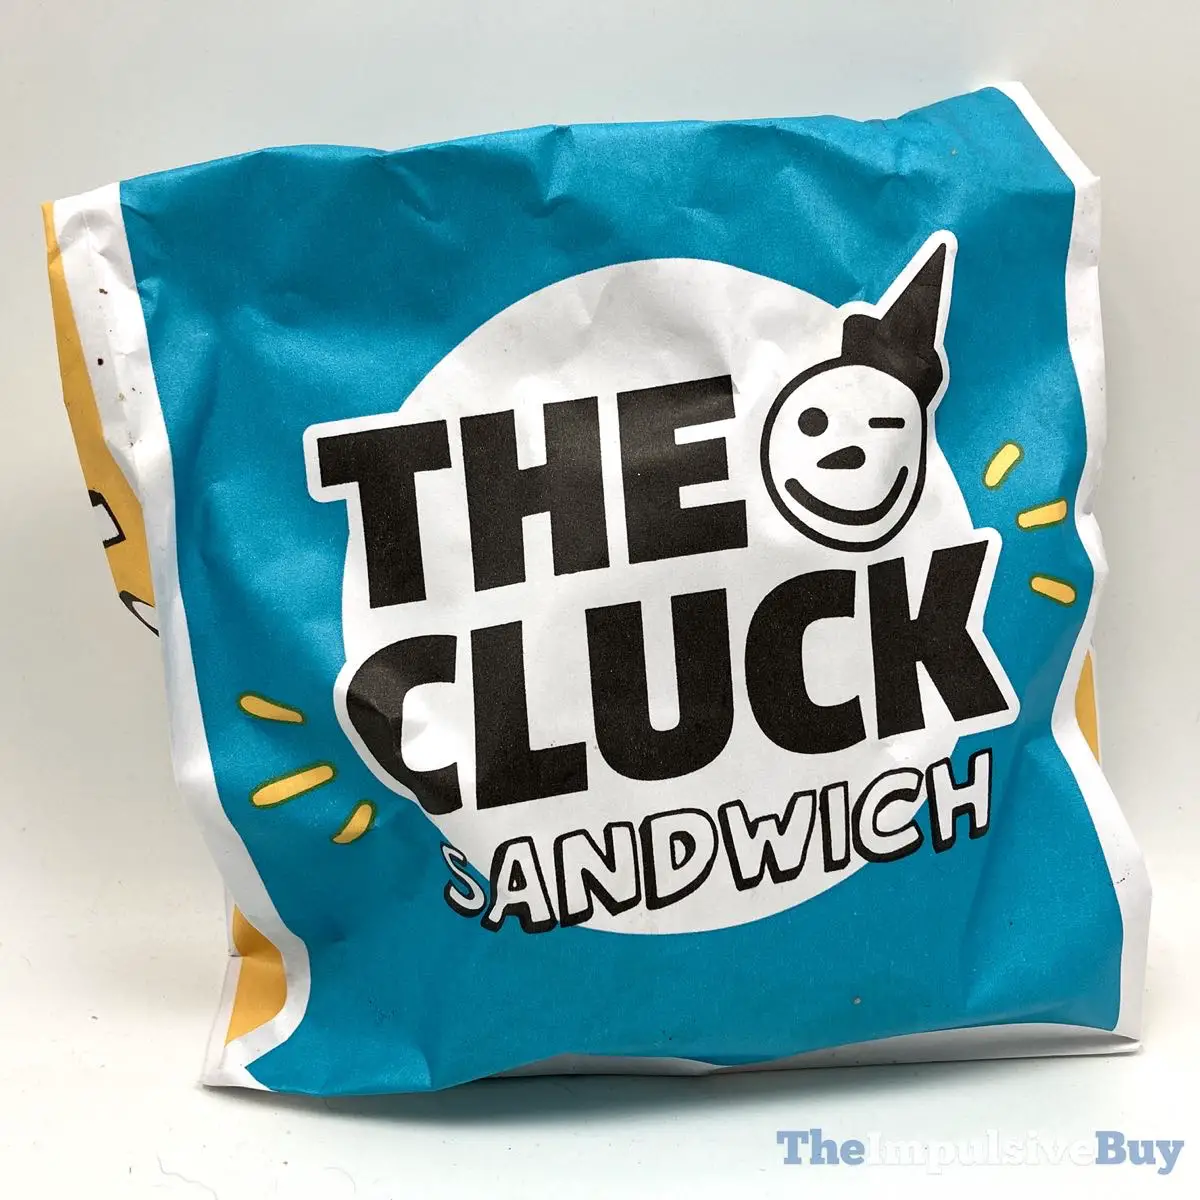 REVIEW: Jack in the Box Cluck Sandwich with Mystery Sauce